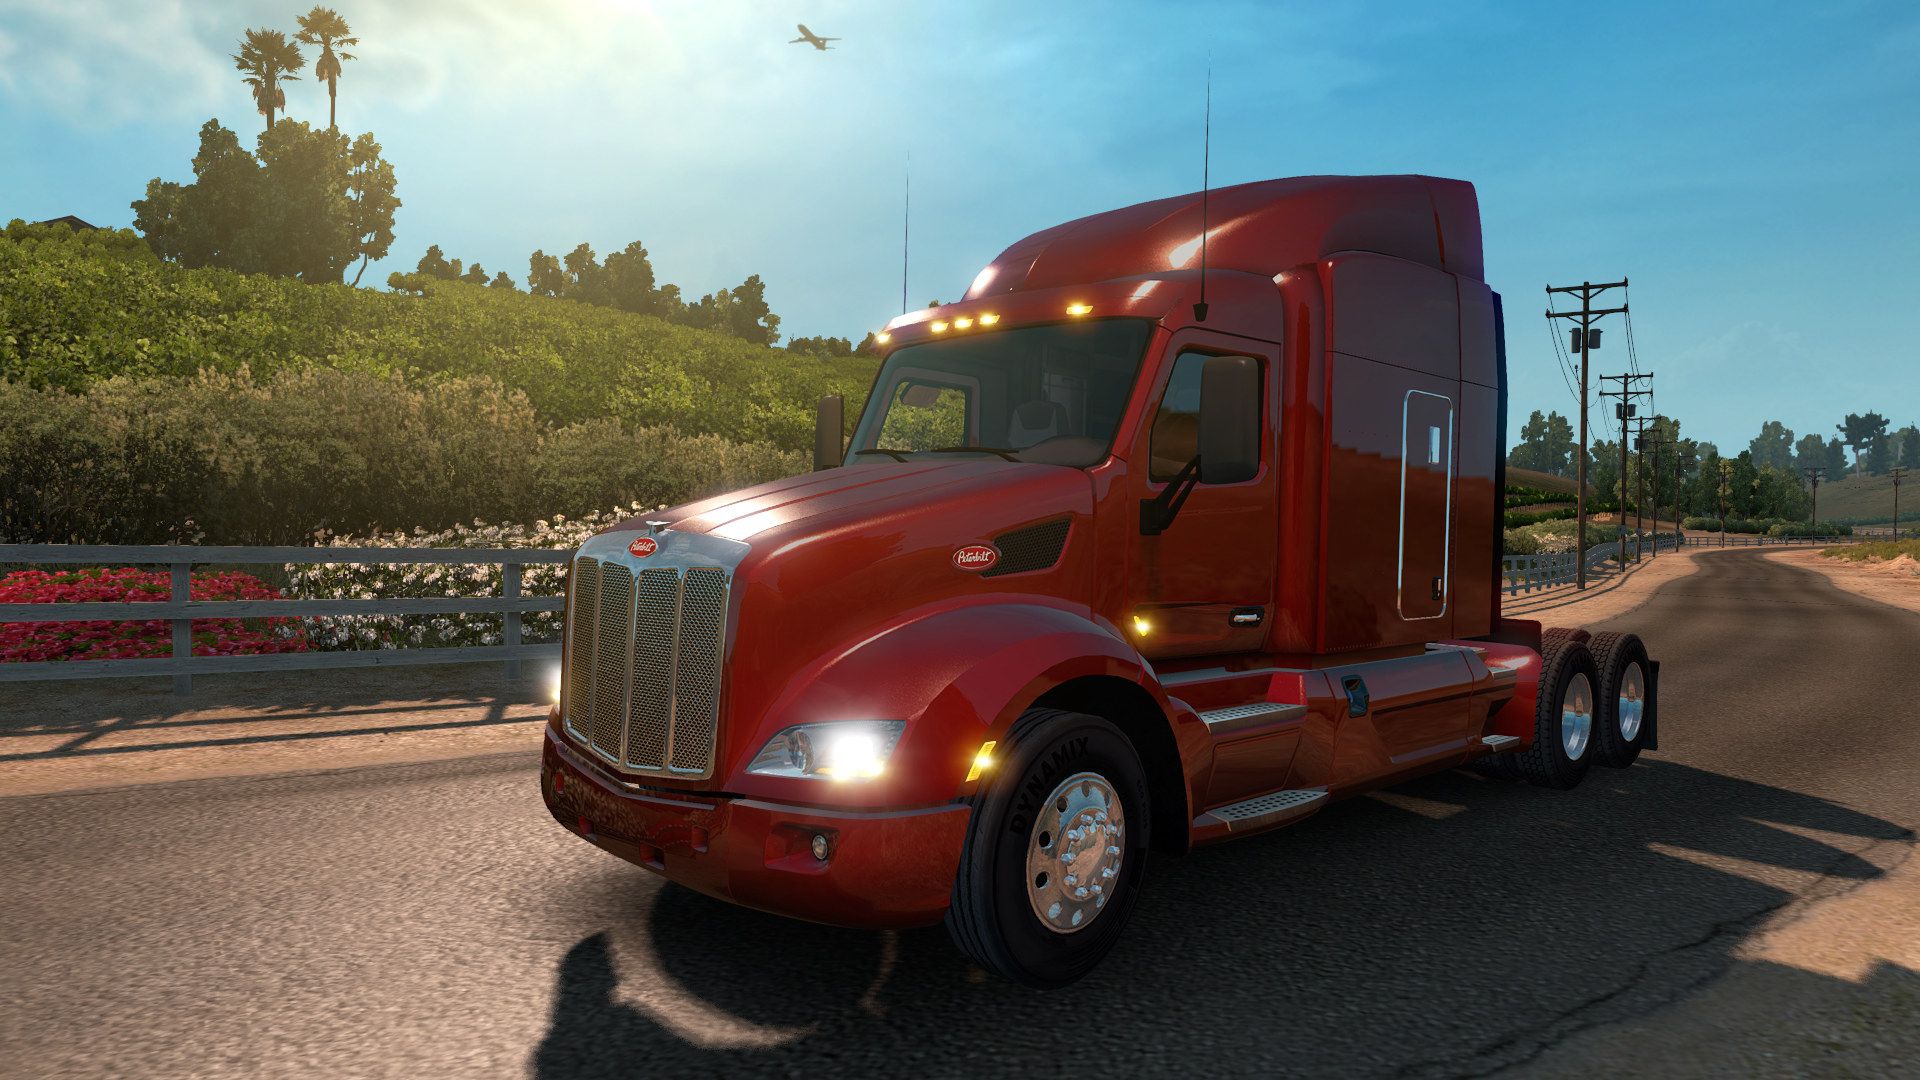 American Truck Simulator new sound engine sounds great. Rock